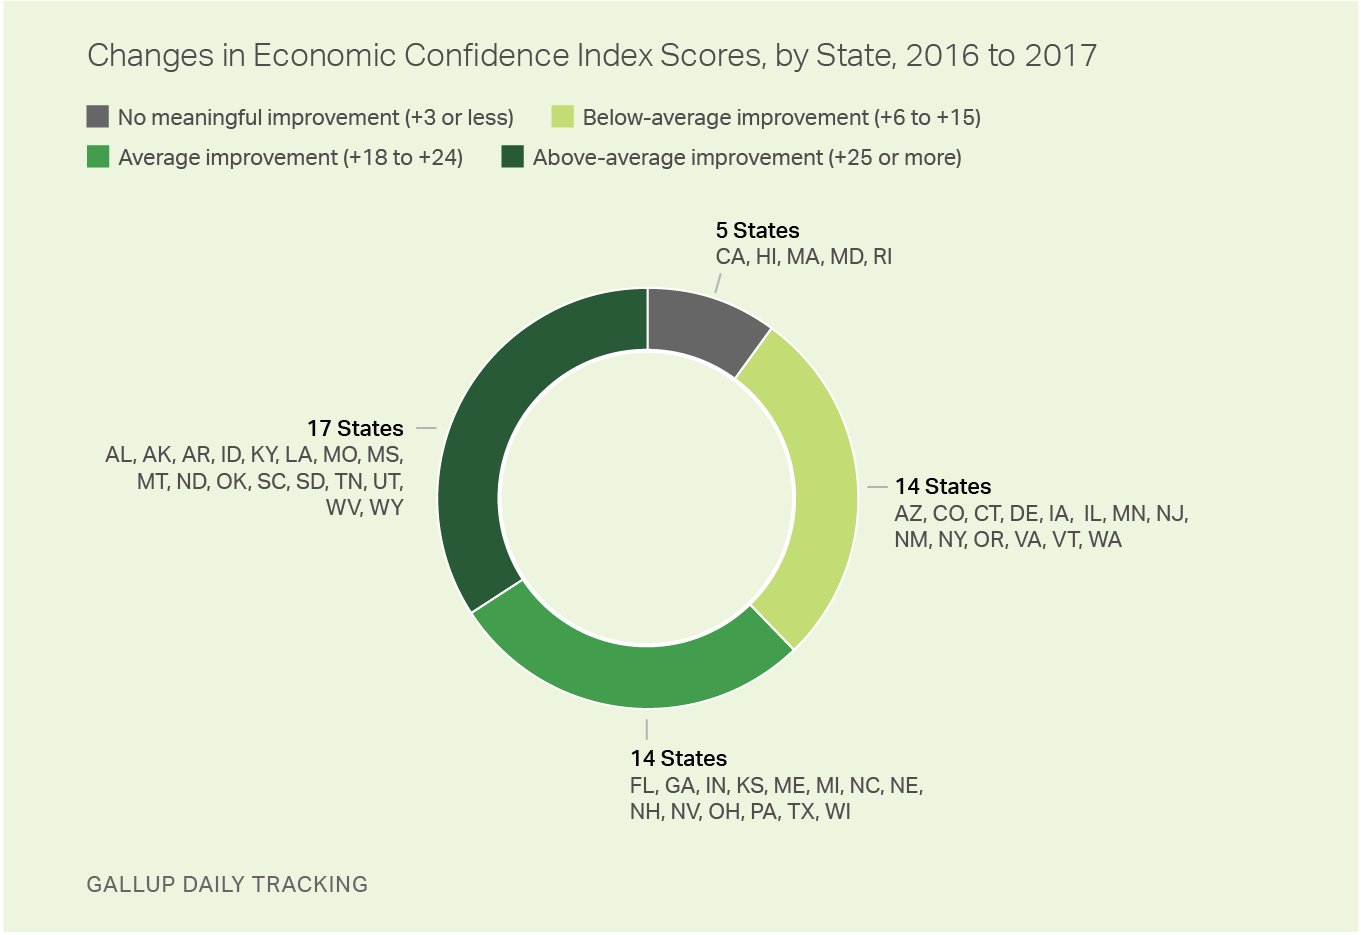 Economic Confidence Index, 2016-2017 Changes, by State